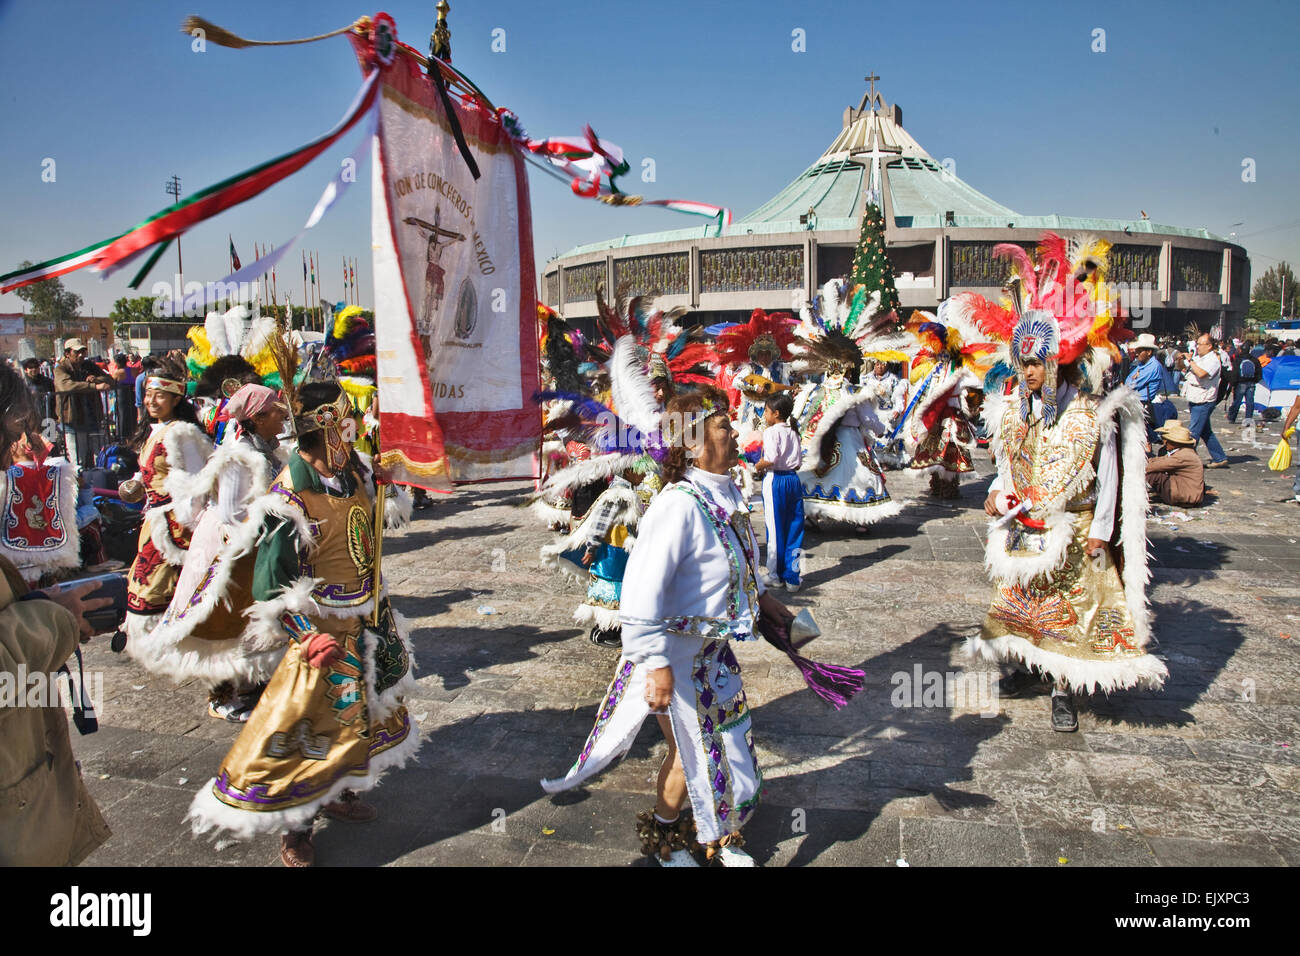 Colorfully dressed pilgrims and dancers are everywhere during the celebration of the Virgin of Guadalupe Feast Day in Mexico Stock Photo